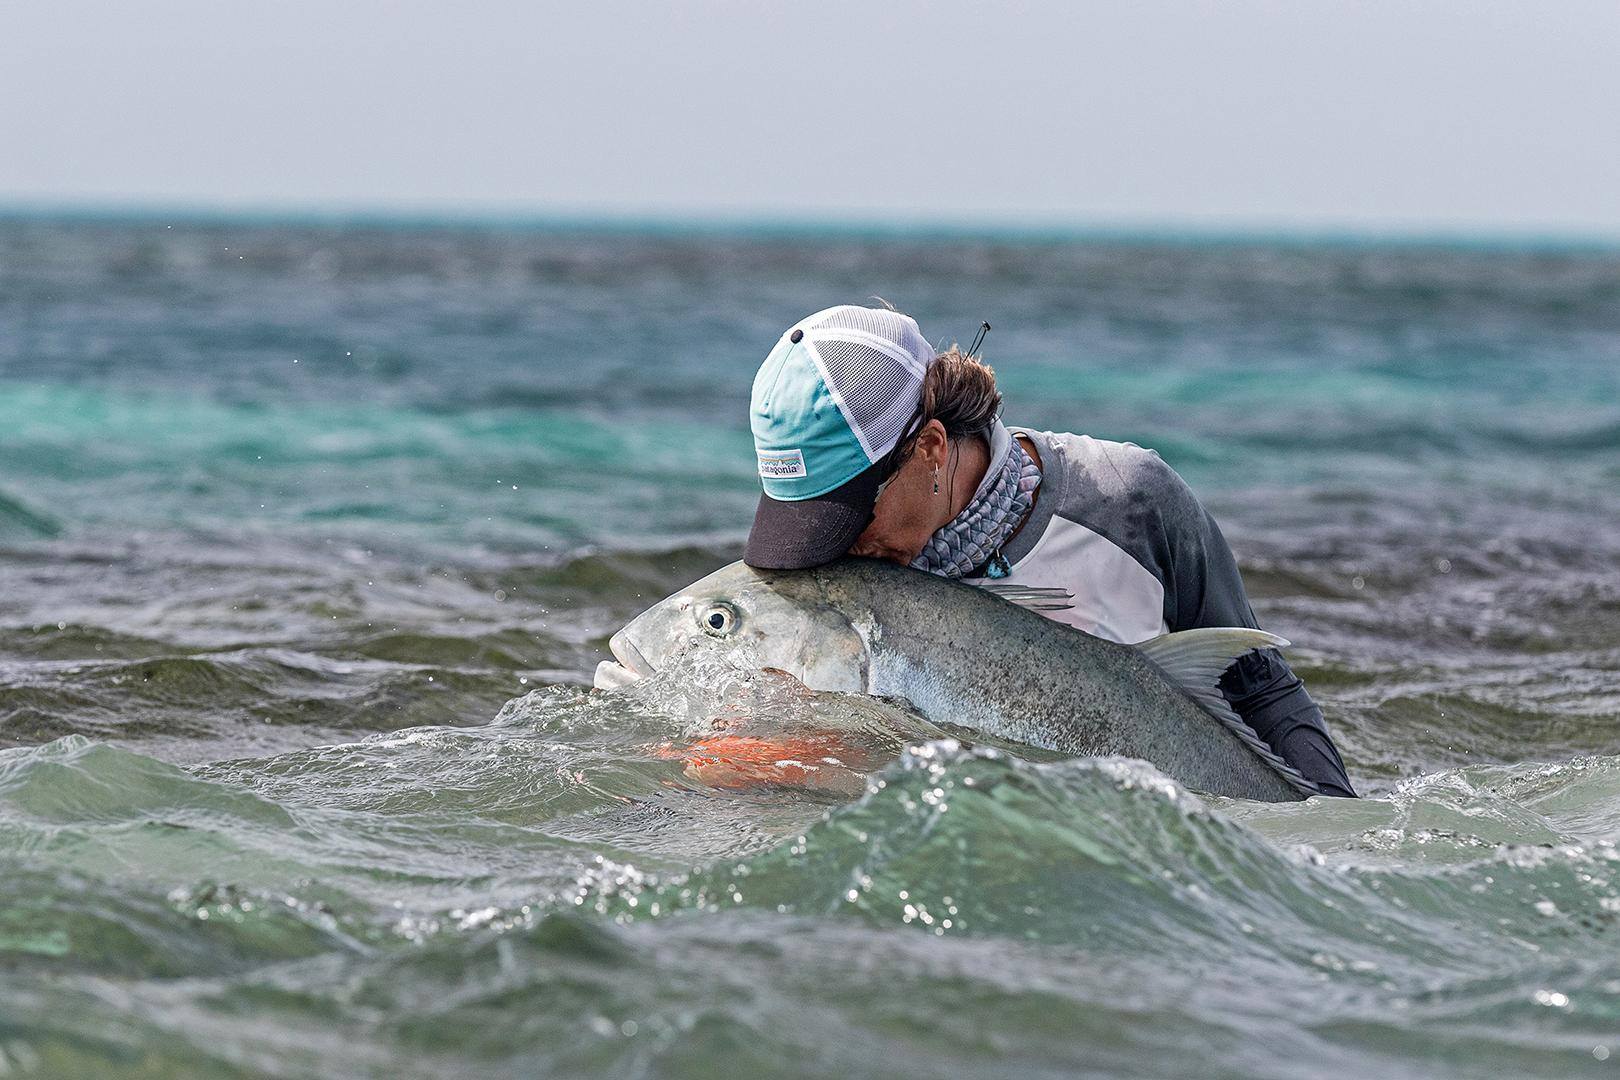 Millie Paini shares a tender moment with her fifth Giant Trevally of the day in the Seychelles.